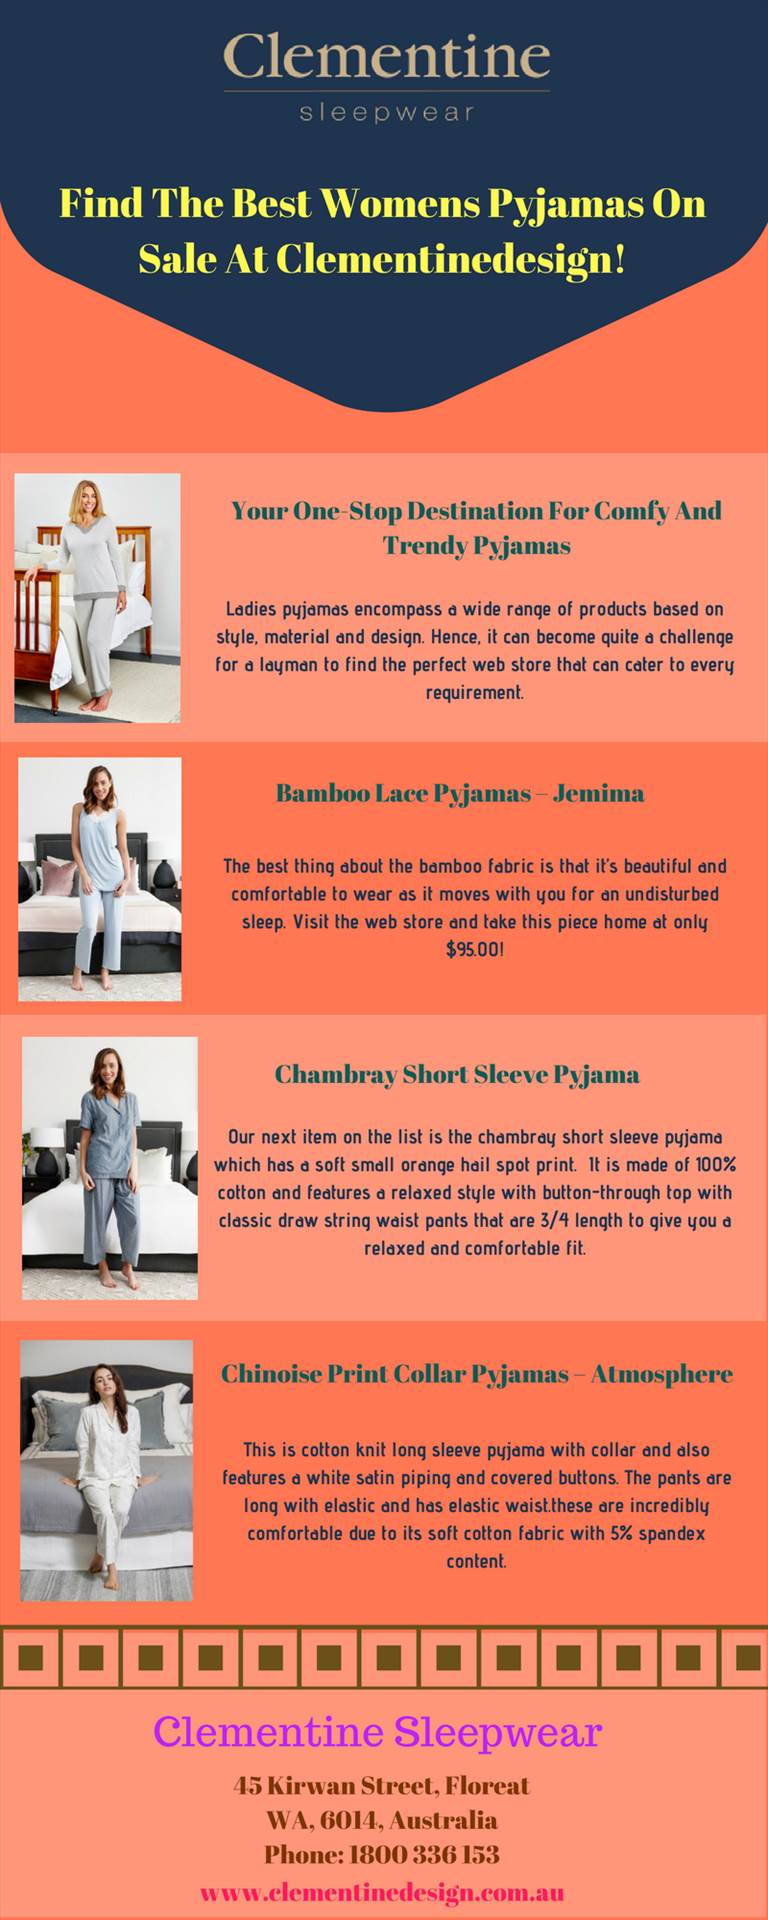 Find The Best Womens Pyjamas On Sale At Clementinedesign!.jpg Women’s pyjamas on sale can lend you comfort no matter which time of the day you are wearing it.  For more details, visit this link: https://medium.com/@clementinedesignau/find-the-best-womens-pyjamas-on-sale-at-clementinedesign-9eb9b236323f by Clementine